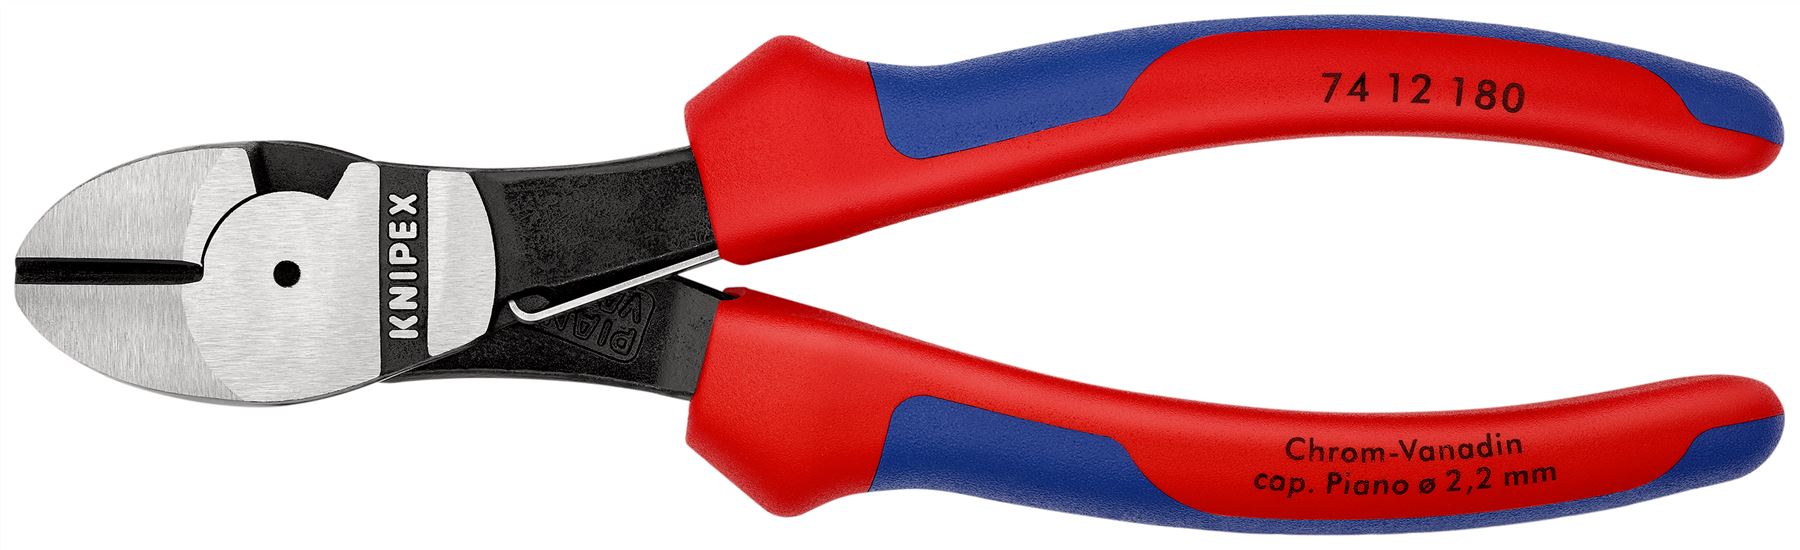 Knipex High Leverage Diagonal Cutter Cutting Pliers 180mm Multi Component Grips 74 12 180